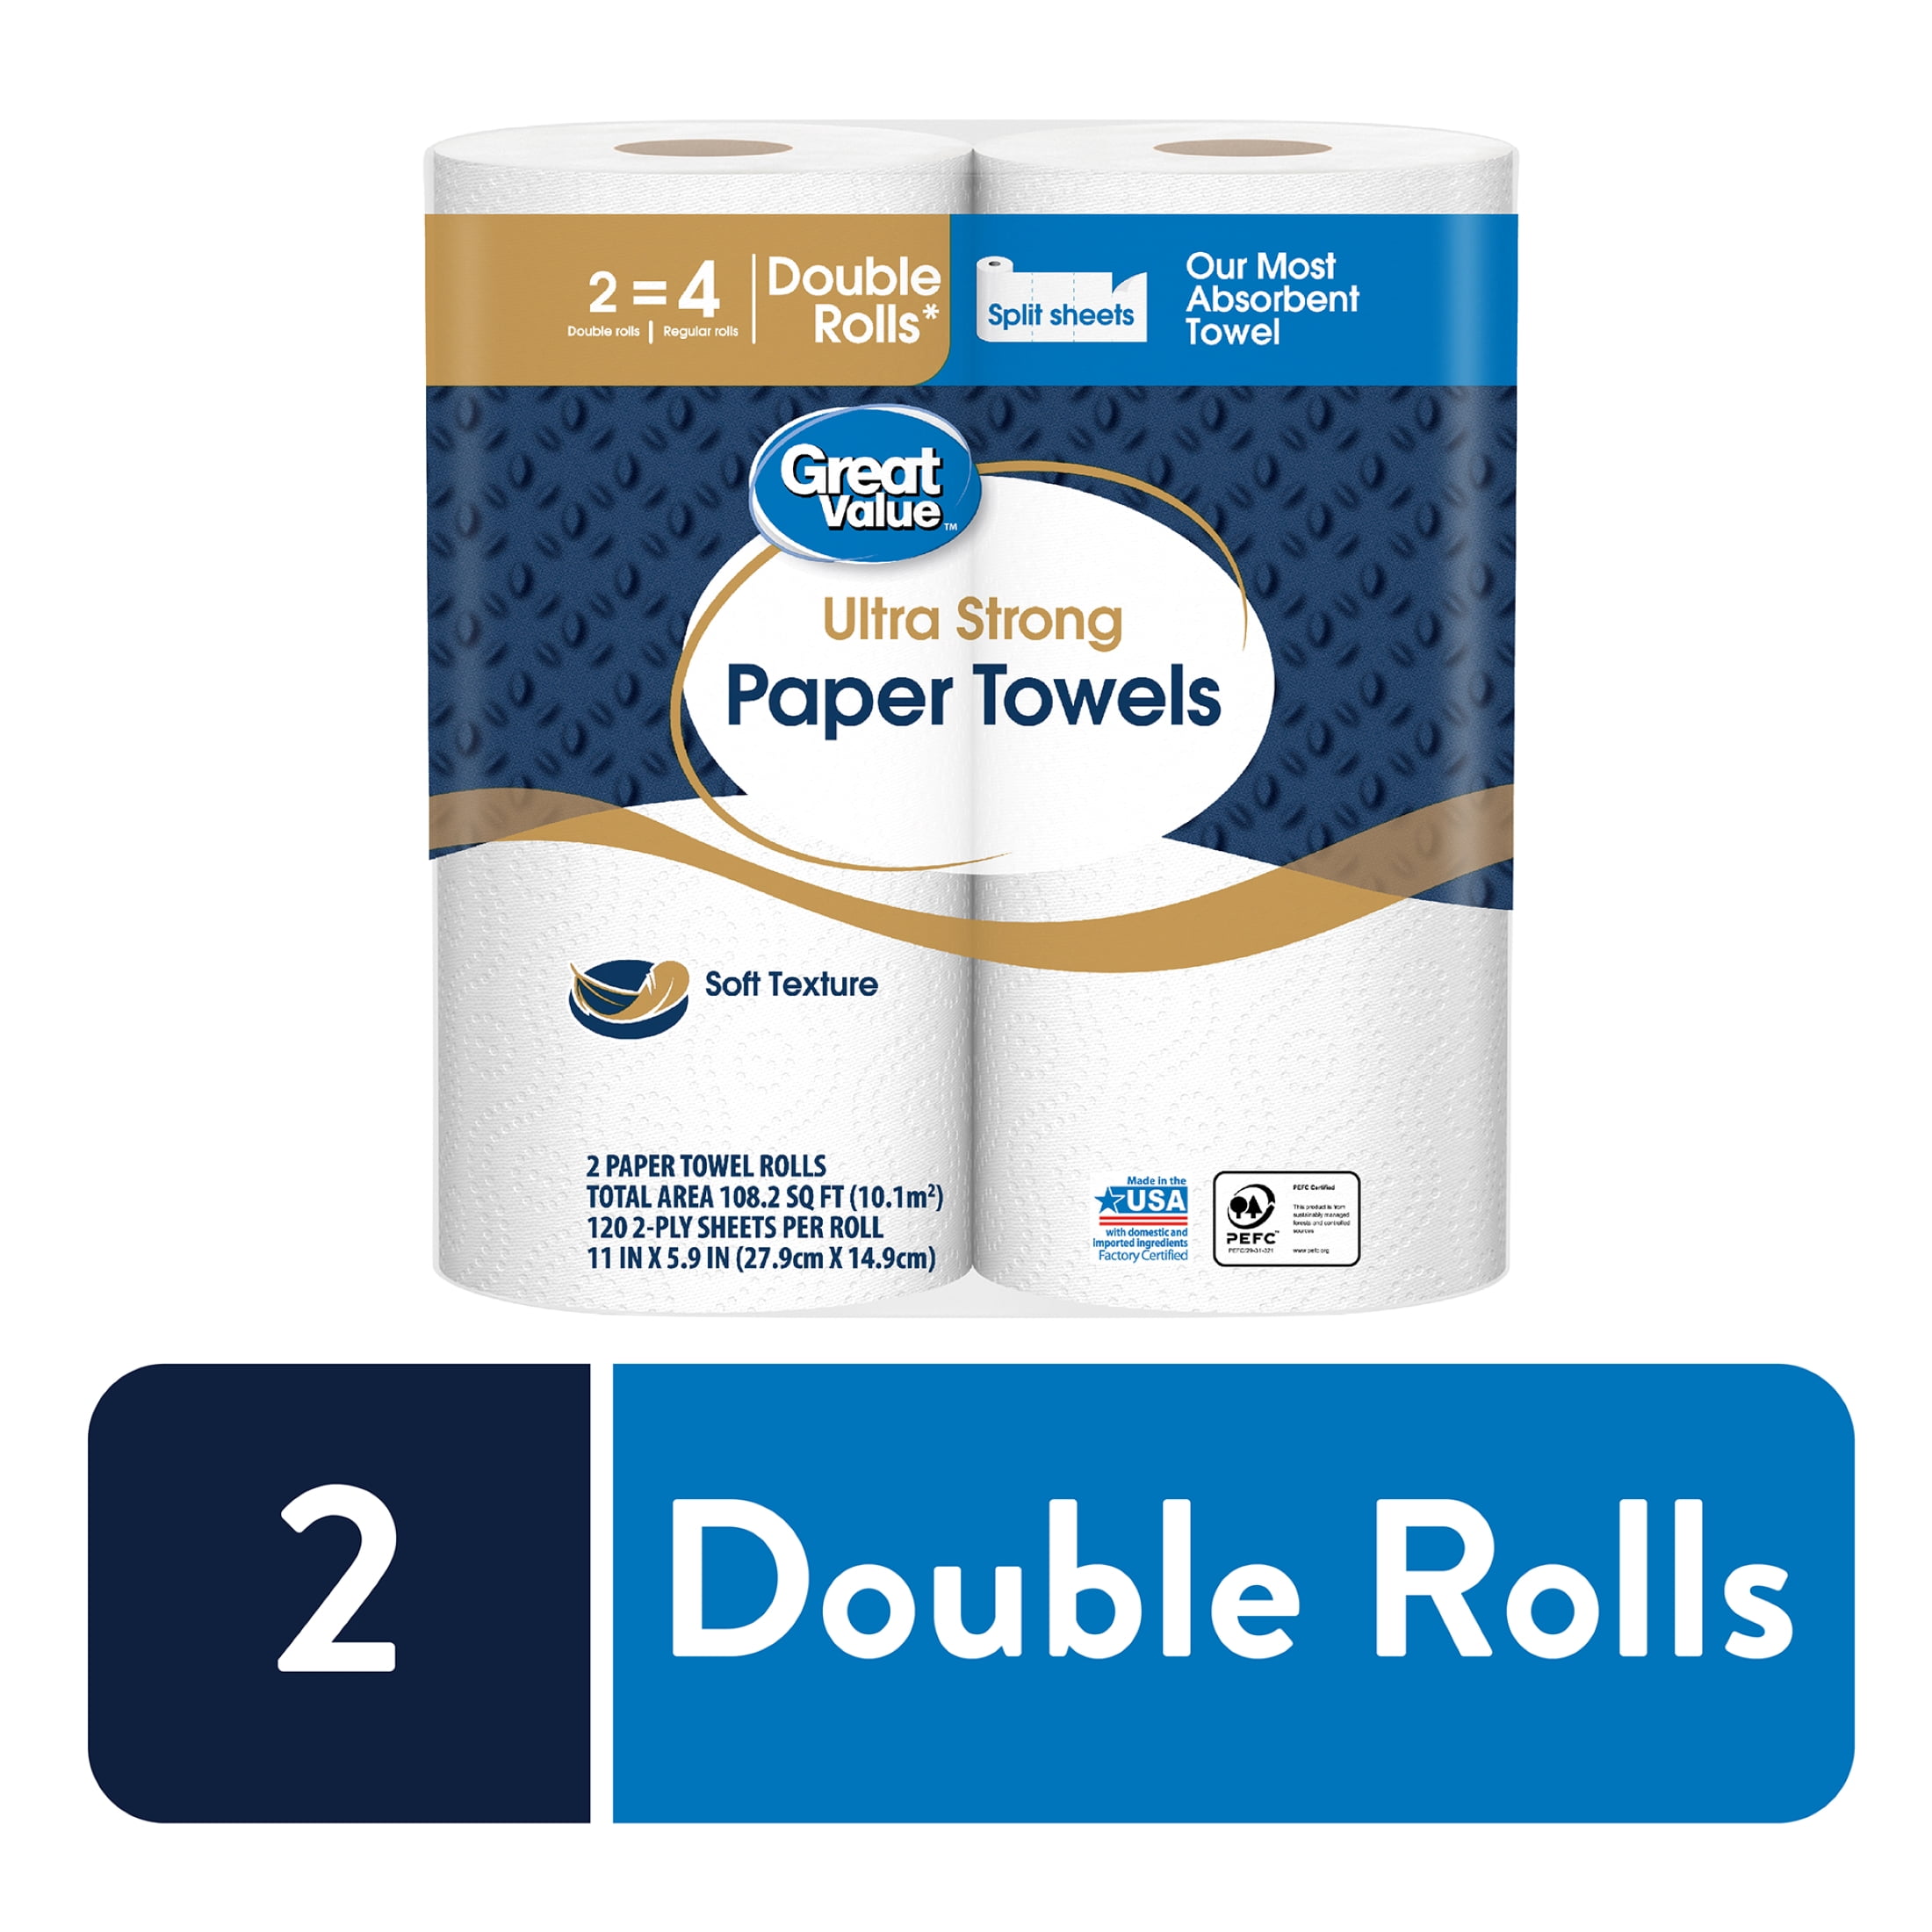 Great Value Paper Towels pack of 1 6 Double Rolls Split Sheets 